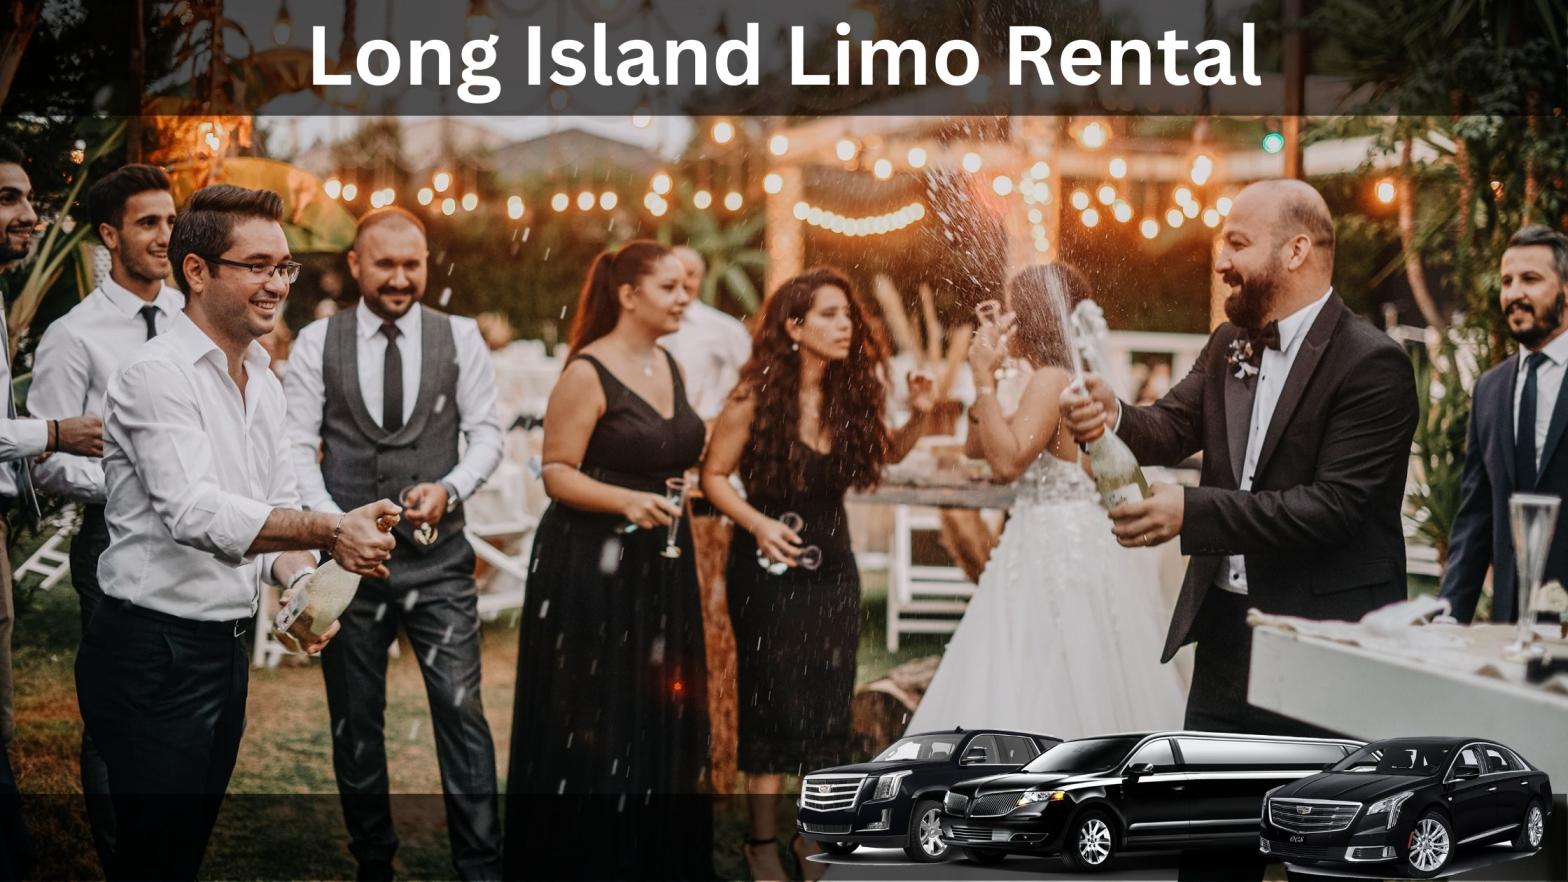 10 Reasons Why Long Island Wedding Limos Are A Must-Have for Your Big Day | Long Island Limo Rental